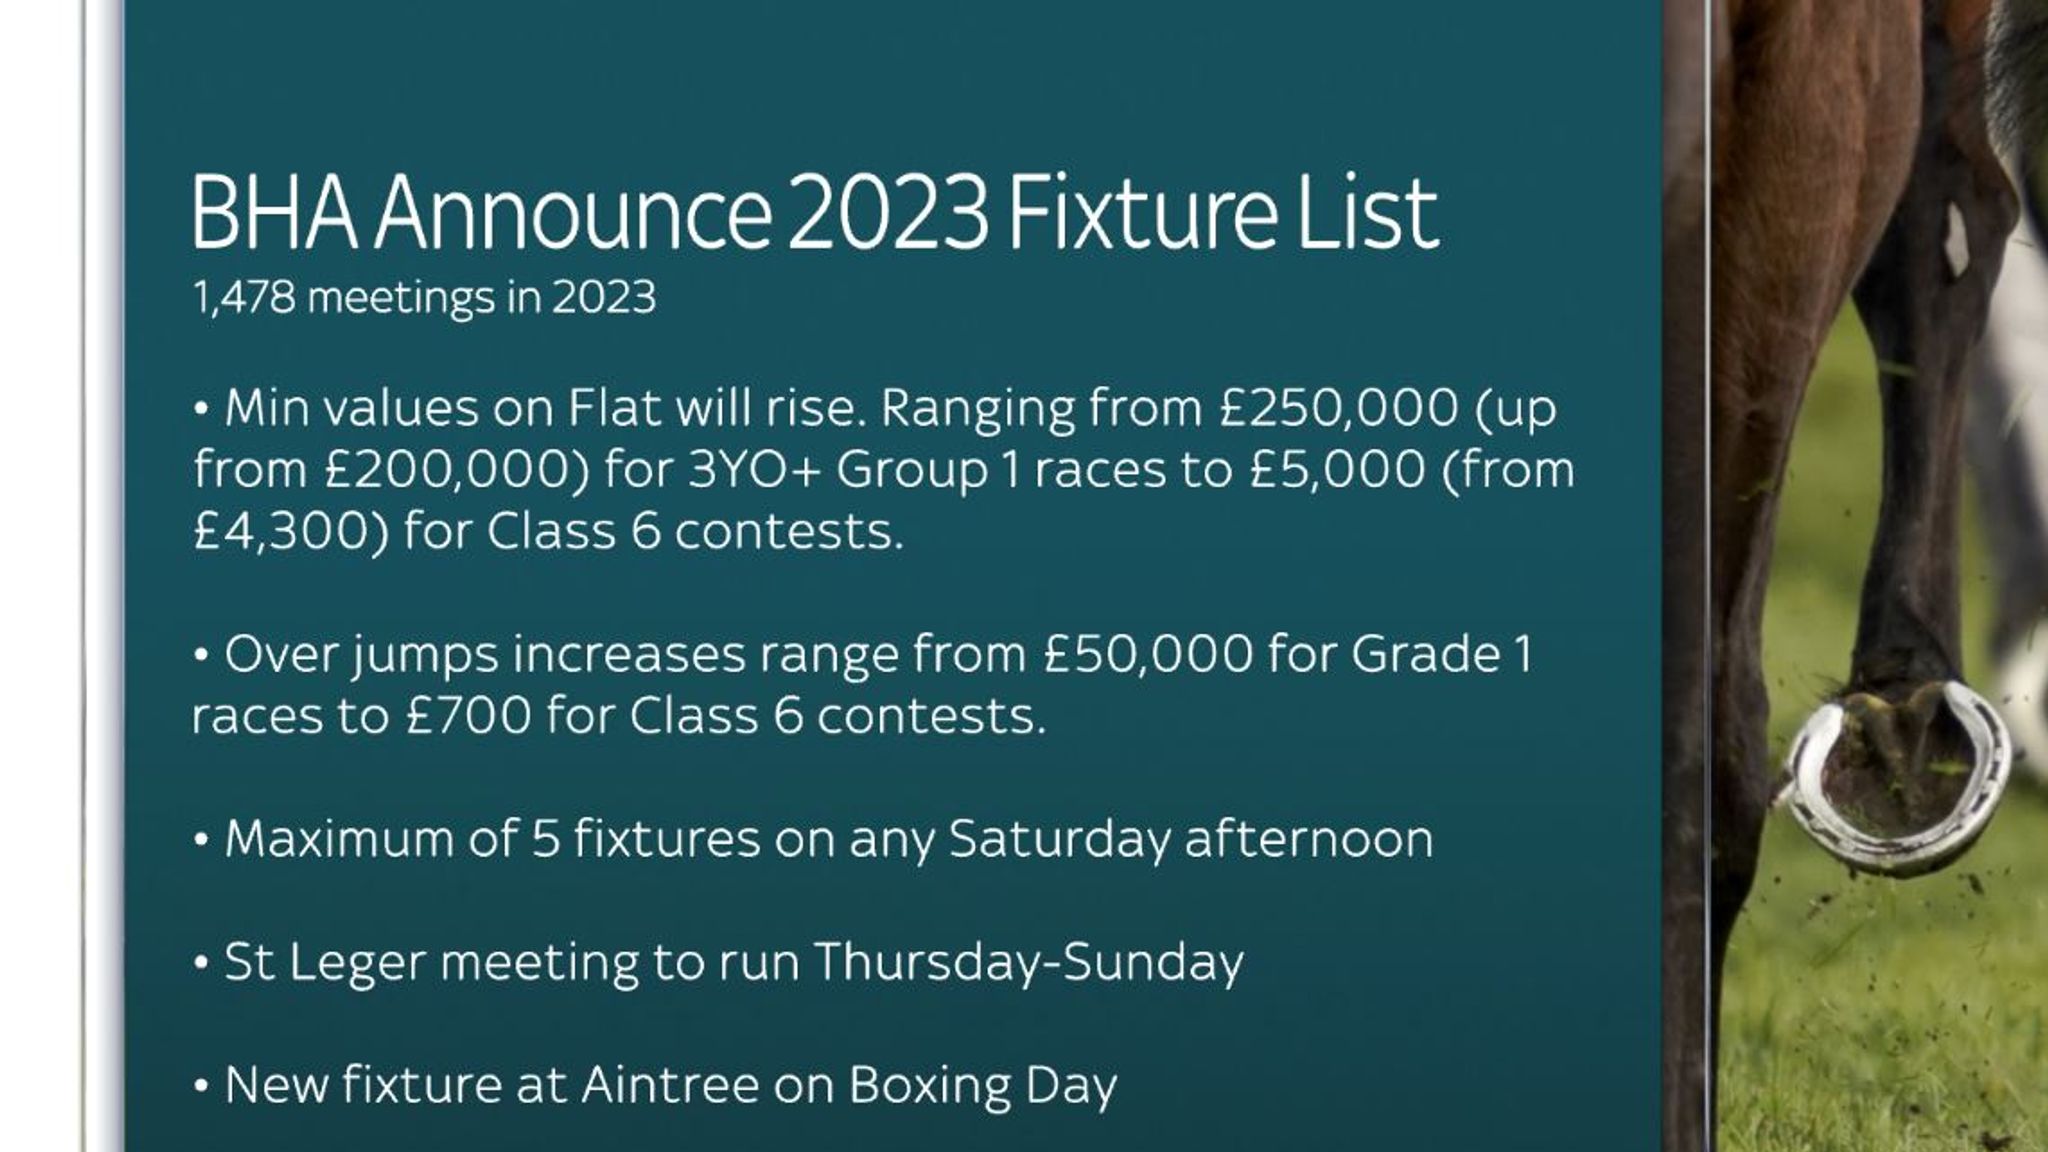 Racing fixture list 2023 BHA to increase minimum race values while